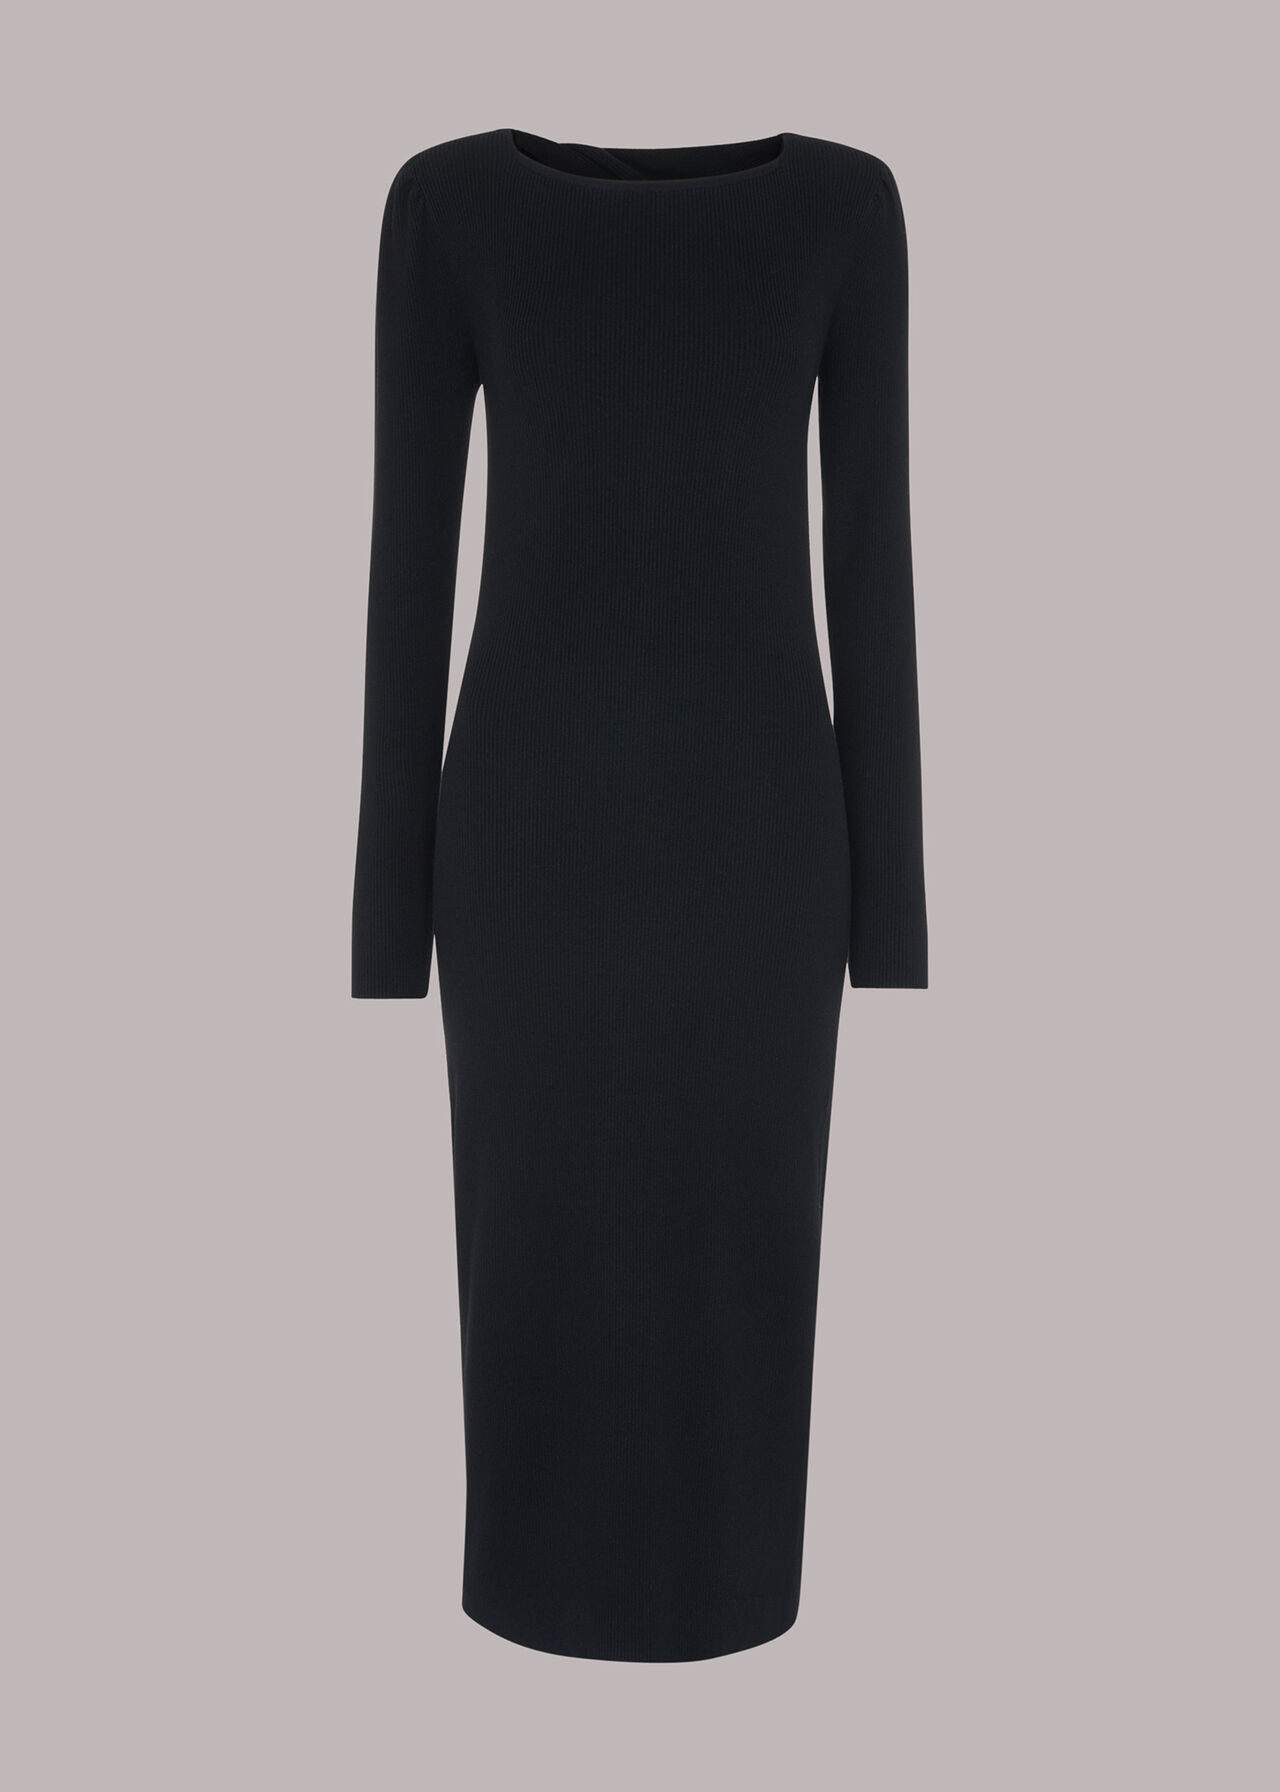 Cut Out Twist Knitted Dress